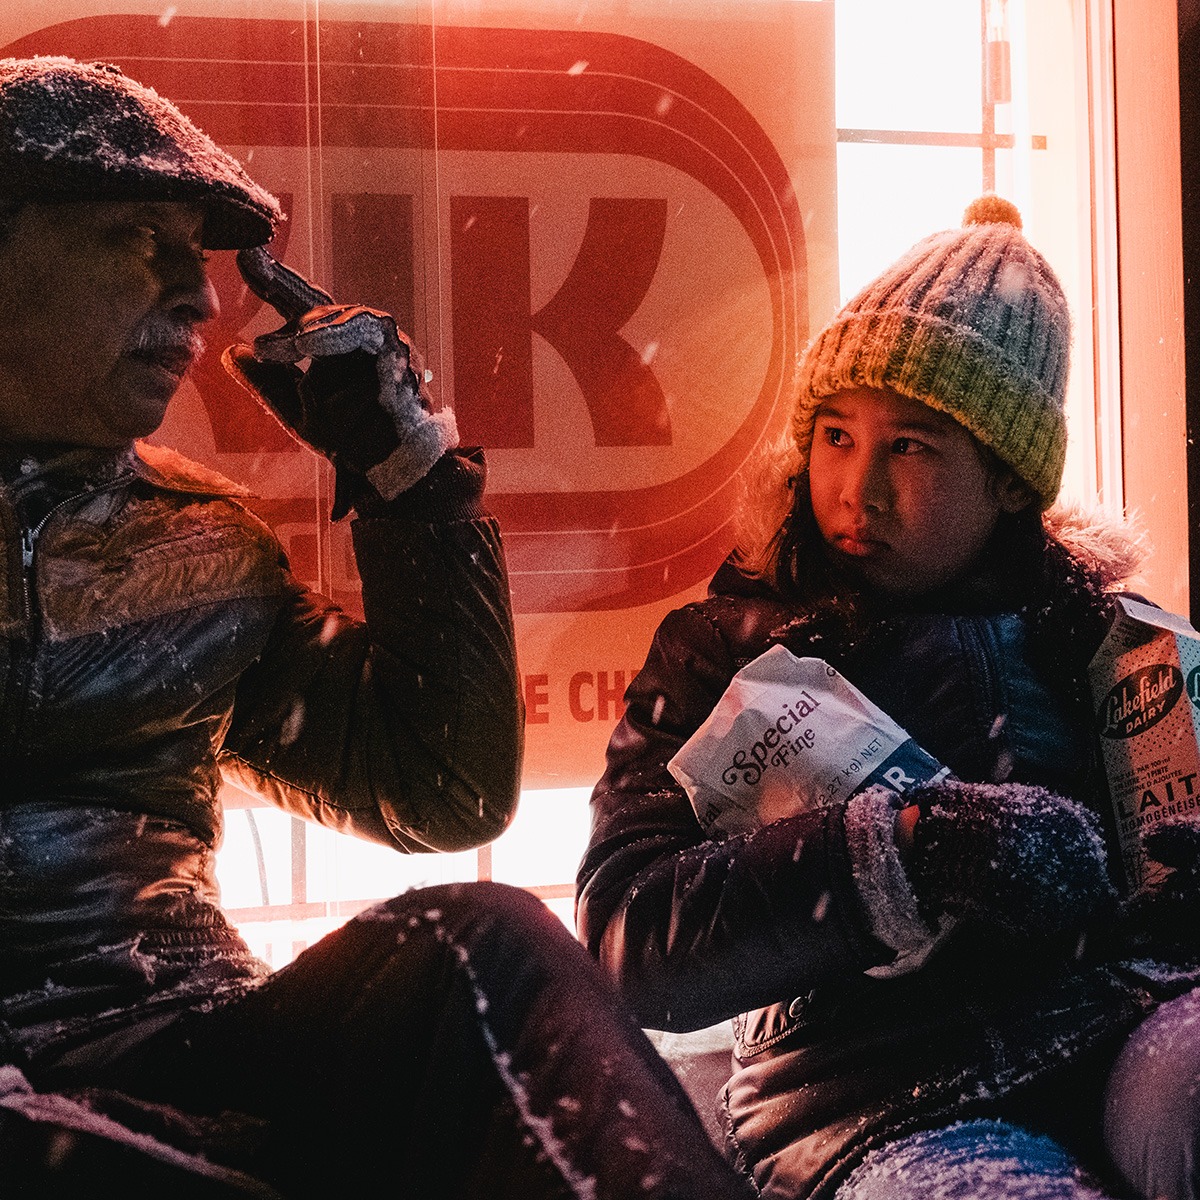 A man and a girl outside a store in the snow.